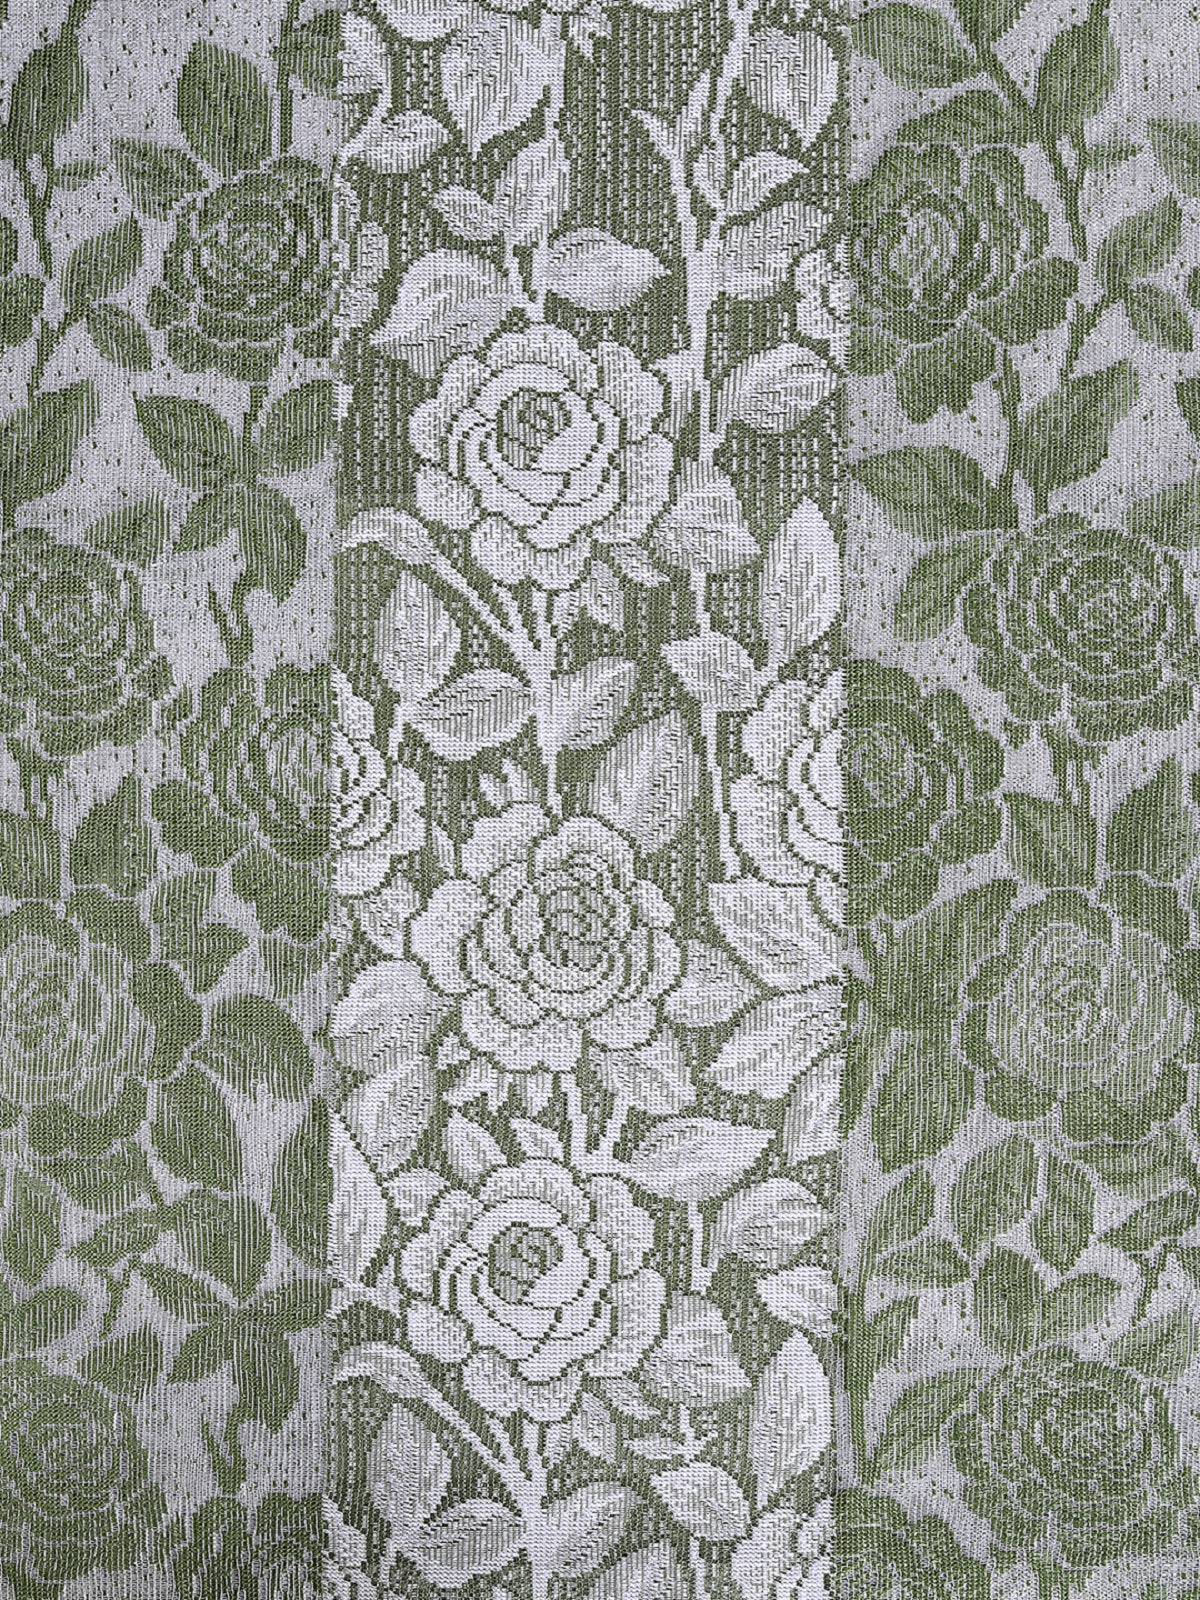 Romee Green & Silver Floral Patterned Set of 2 Door Curtains